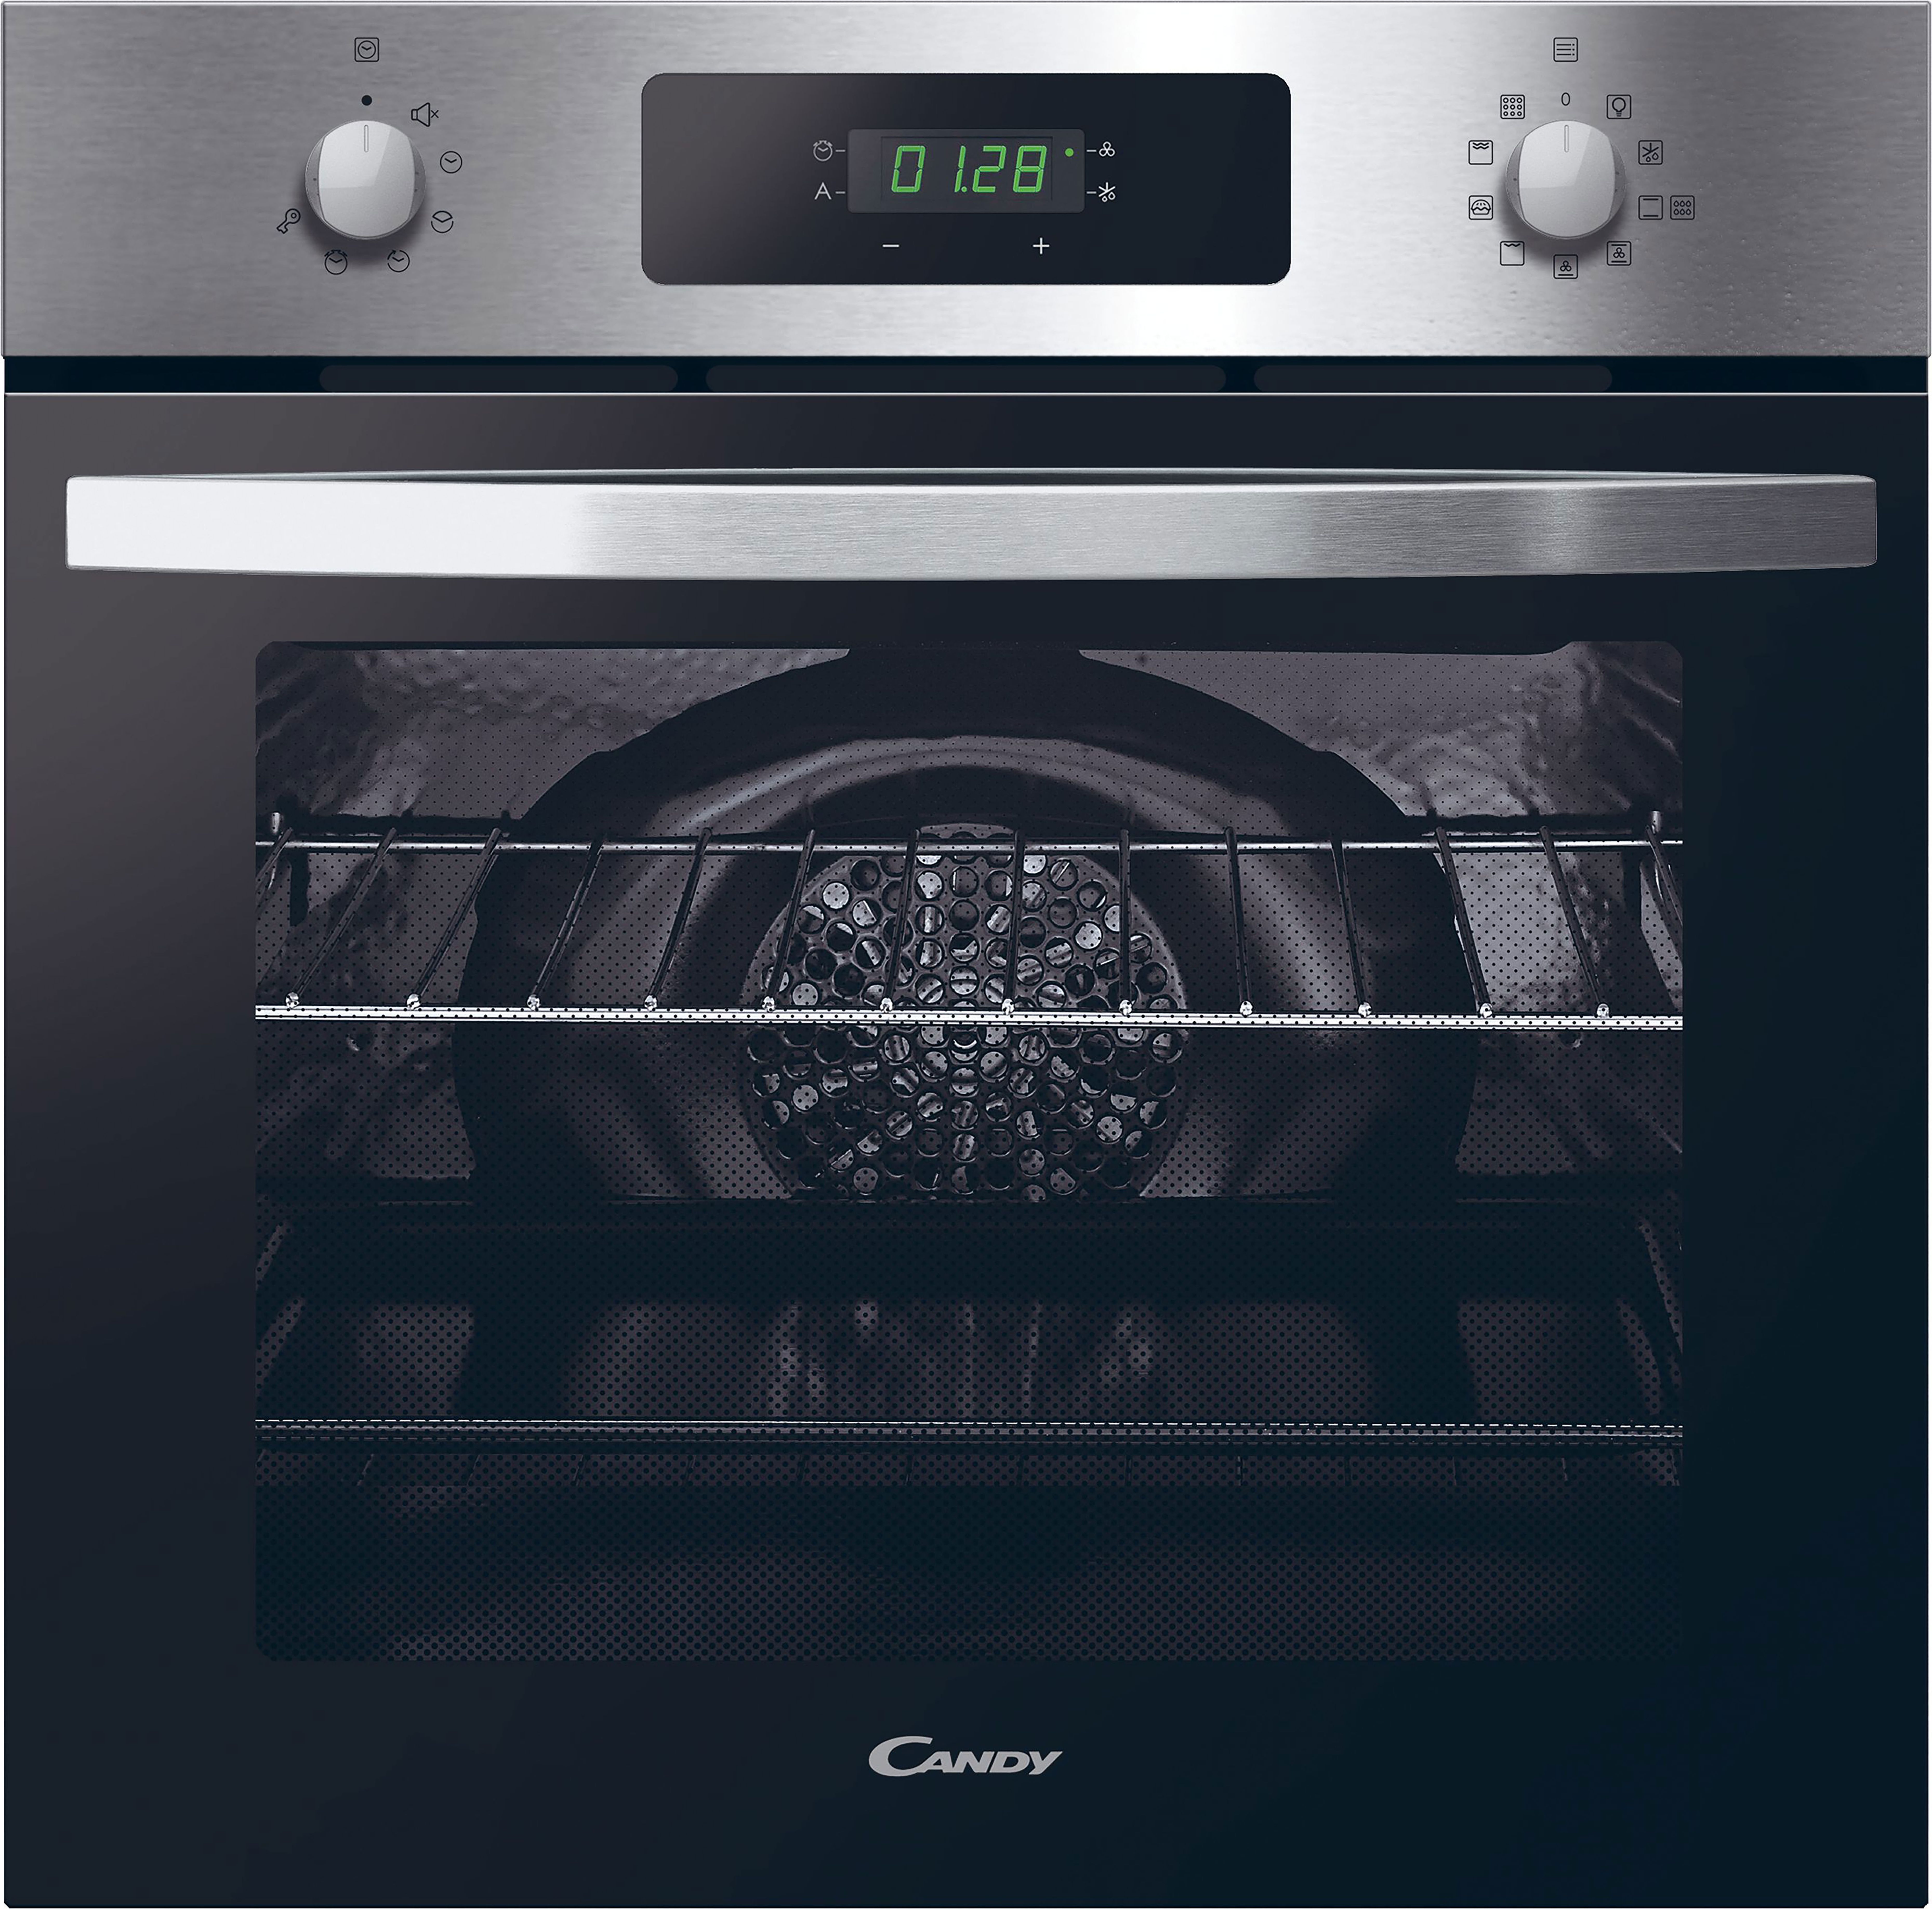 Candy Idea FIDCX676 Built In Electric Single Oven and Pyrolytic Cleaning - Stainless Steel - A Rated, Stainless Steel